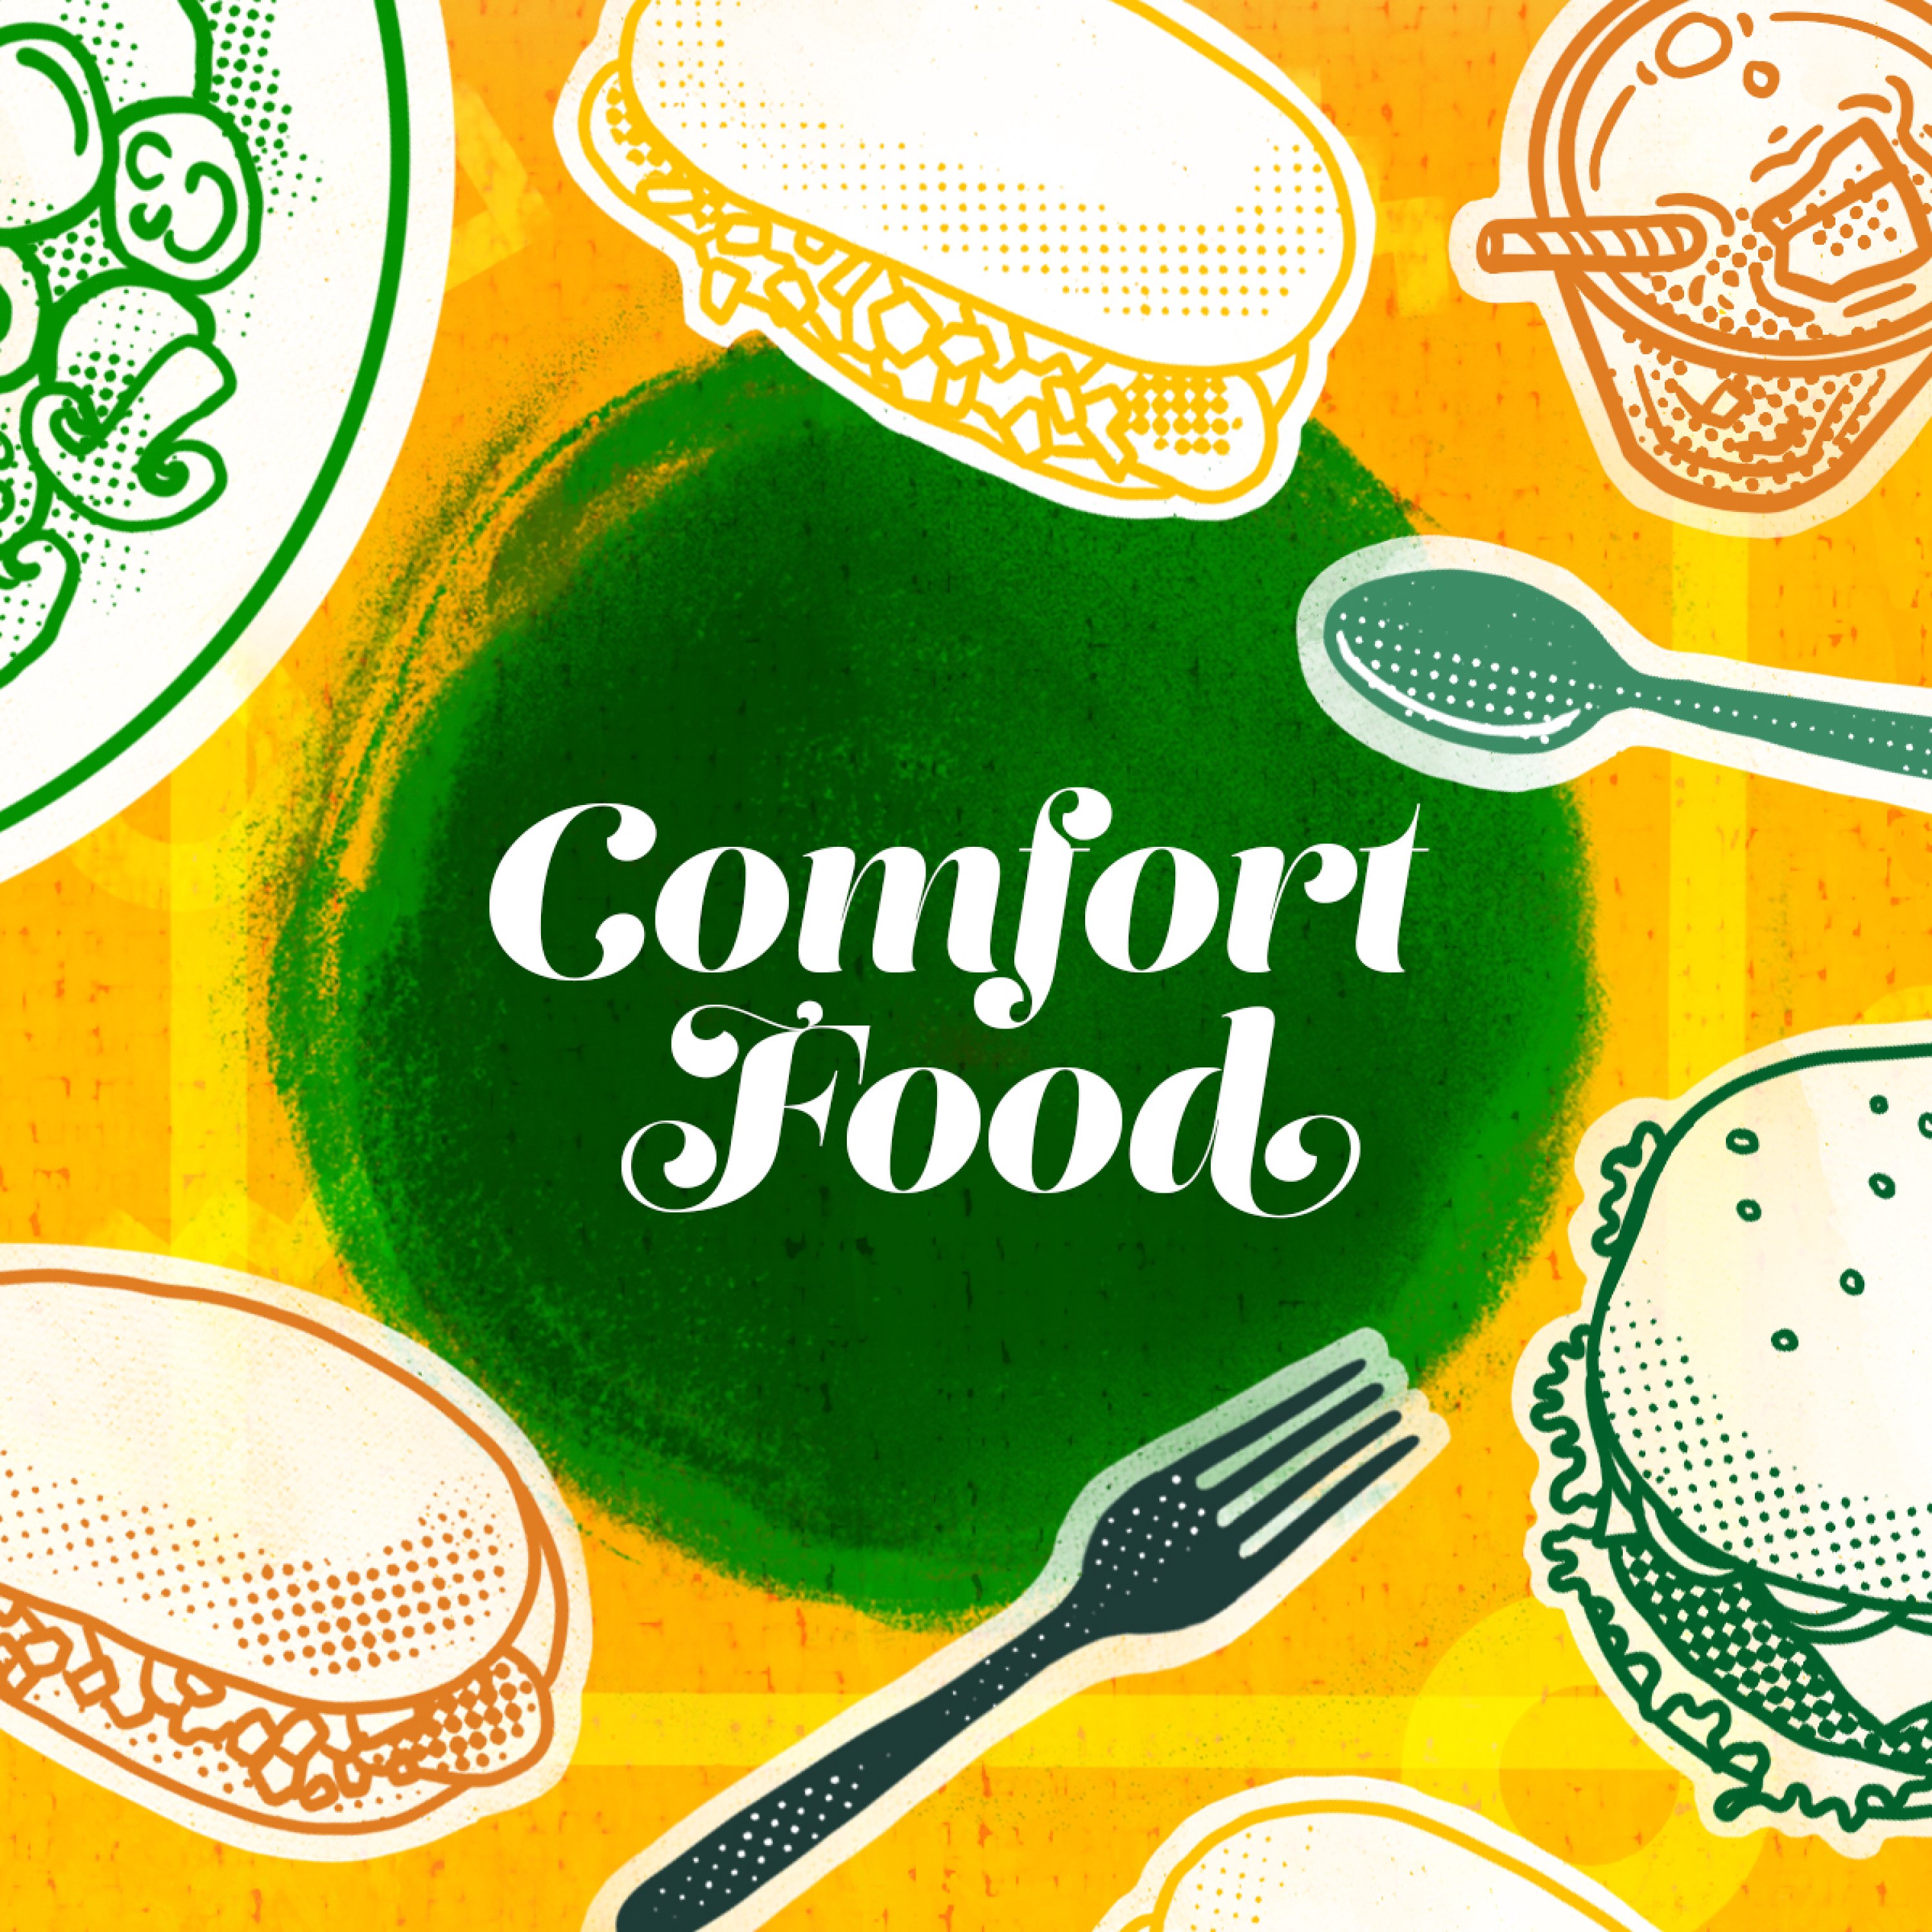 Comfort Food #5 - Michelle Watts and Holly Ragle